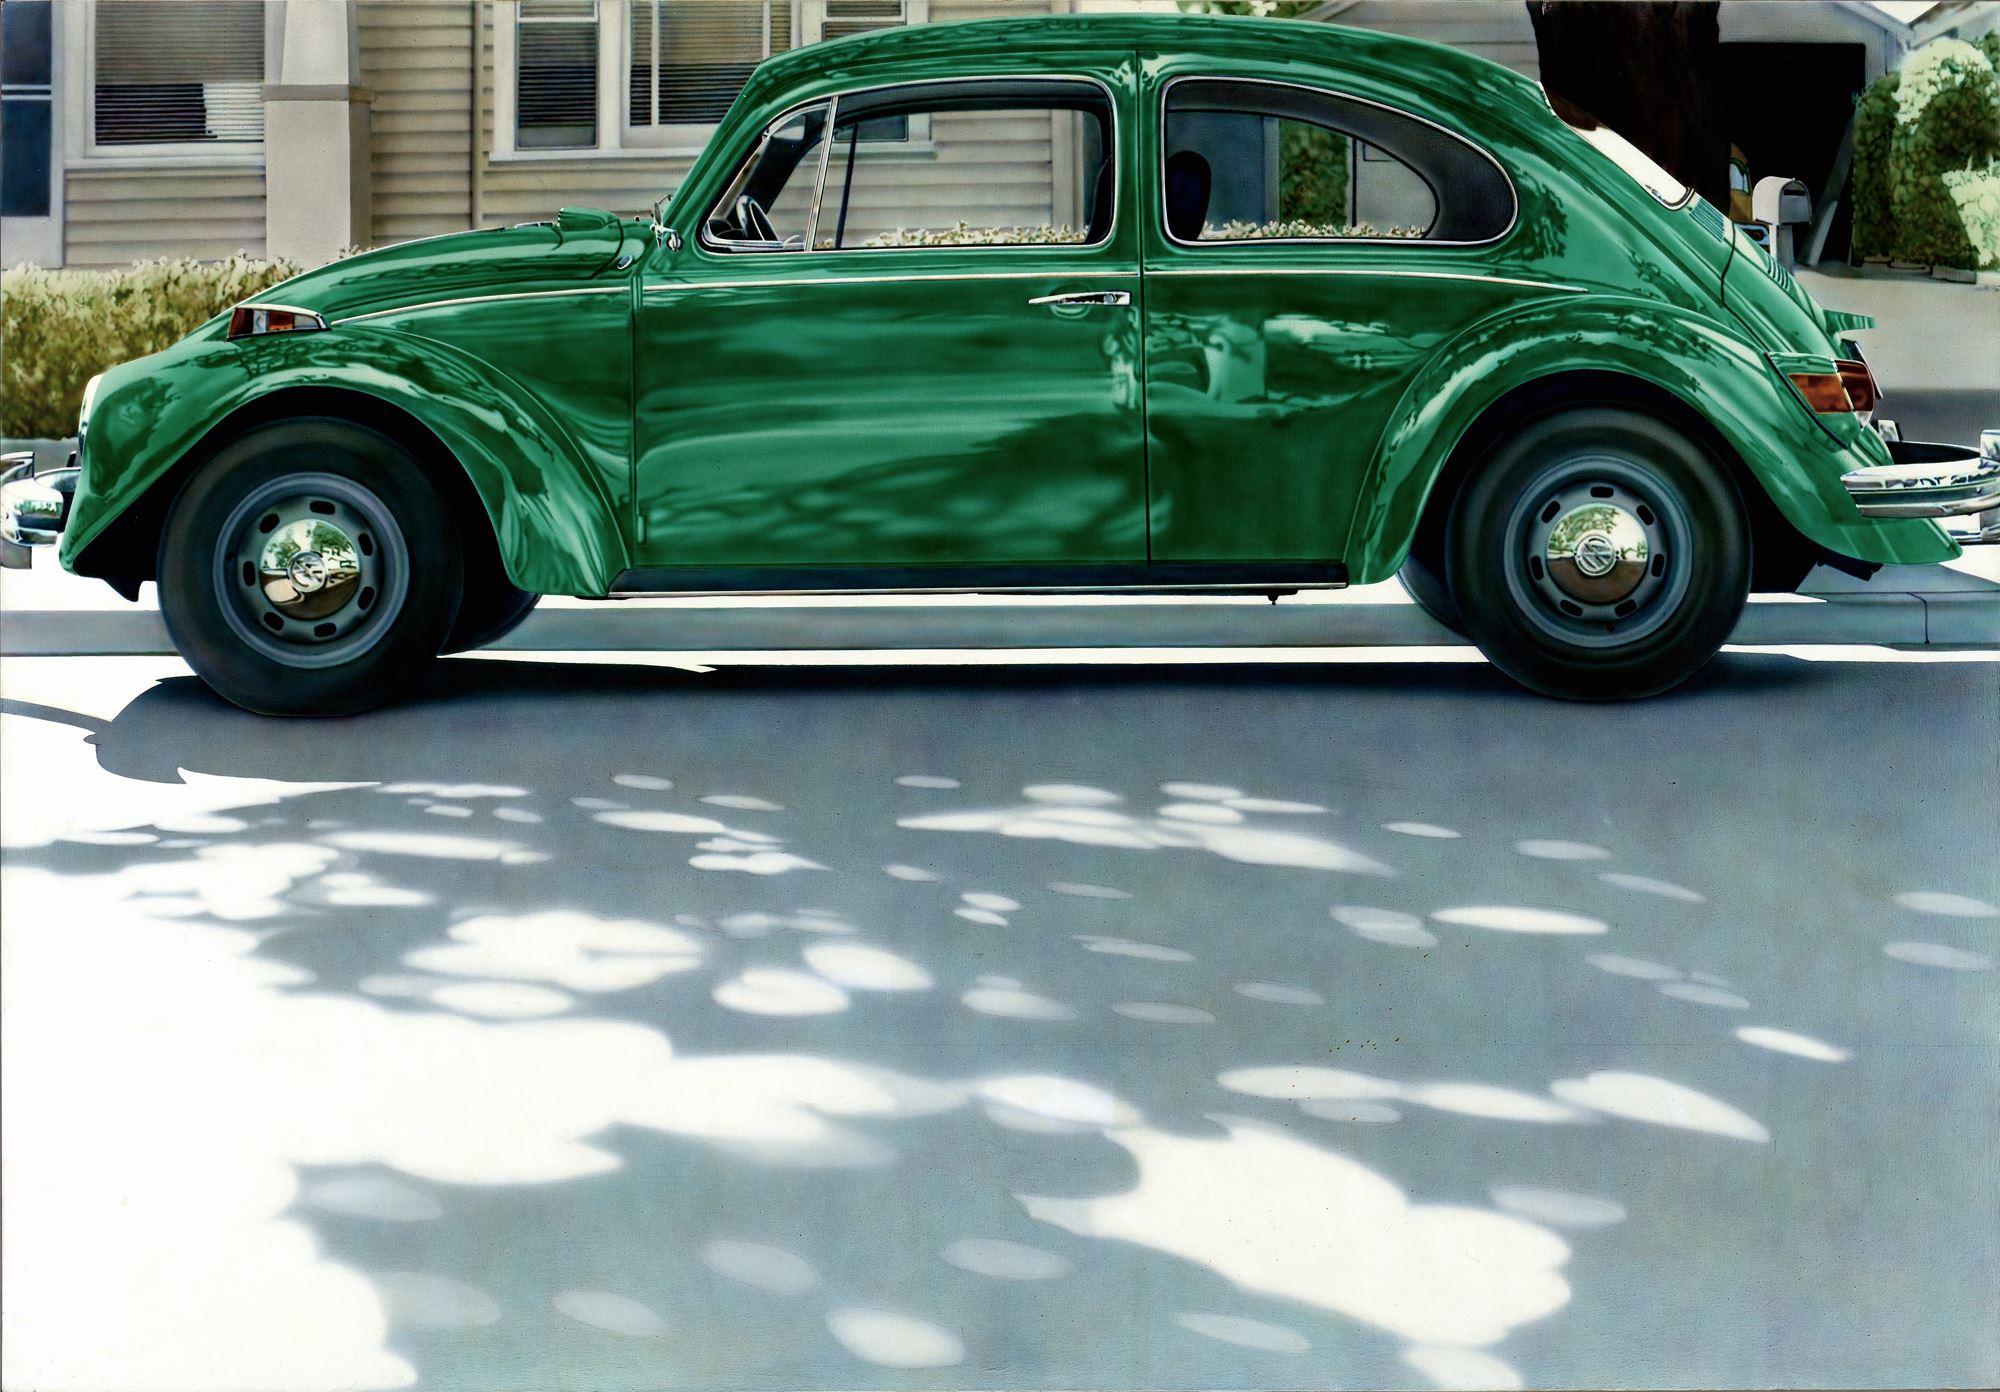 <p>Don Eddy, <i>Green Volkswagen</i>. Acrylic on canvas, 66 x 95 inches. Collection of the Nasher Museum of Art at Duke University.</p>
